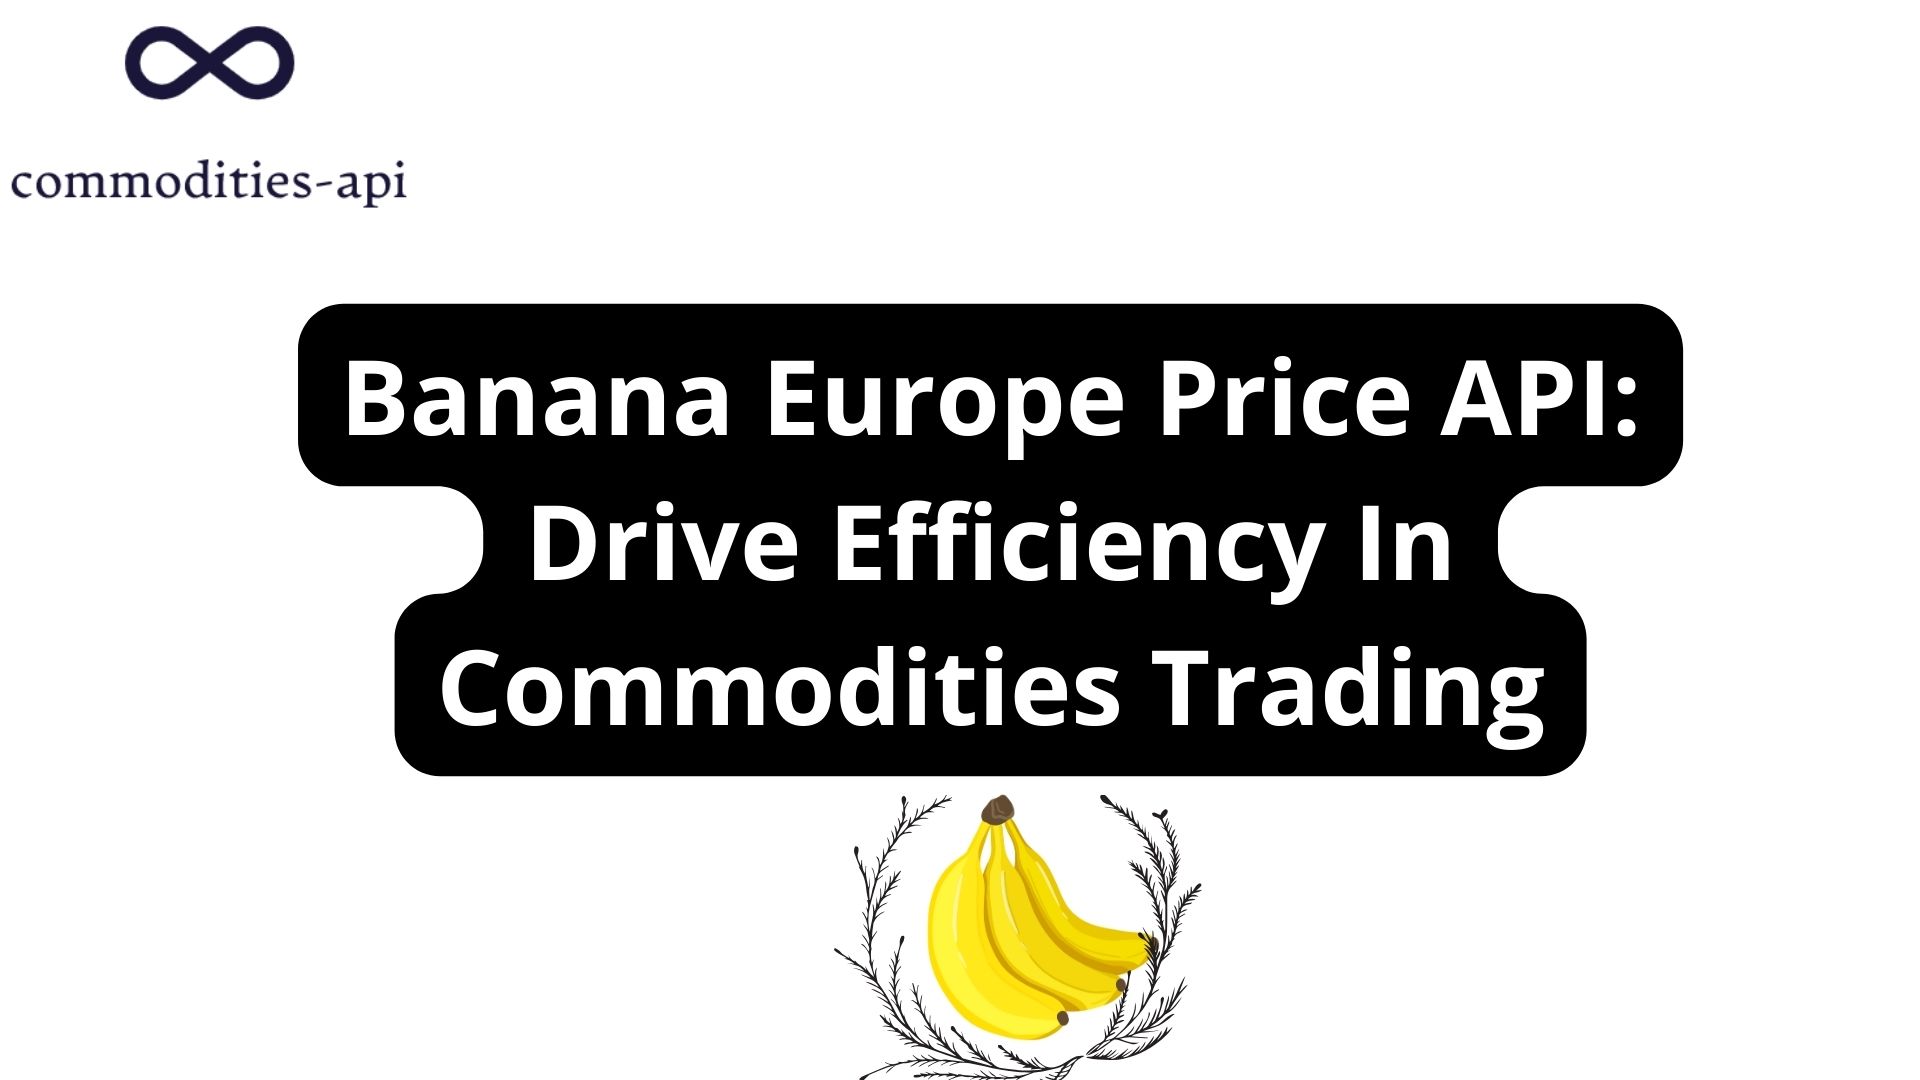 Banana Europe Price API: Drive Efficiency In Commodities Trading